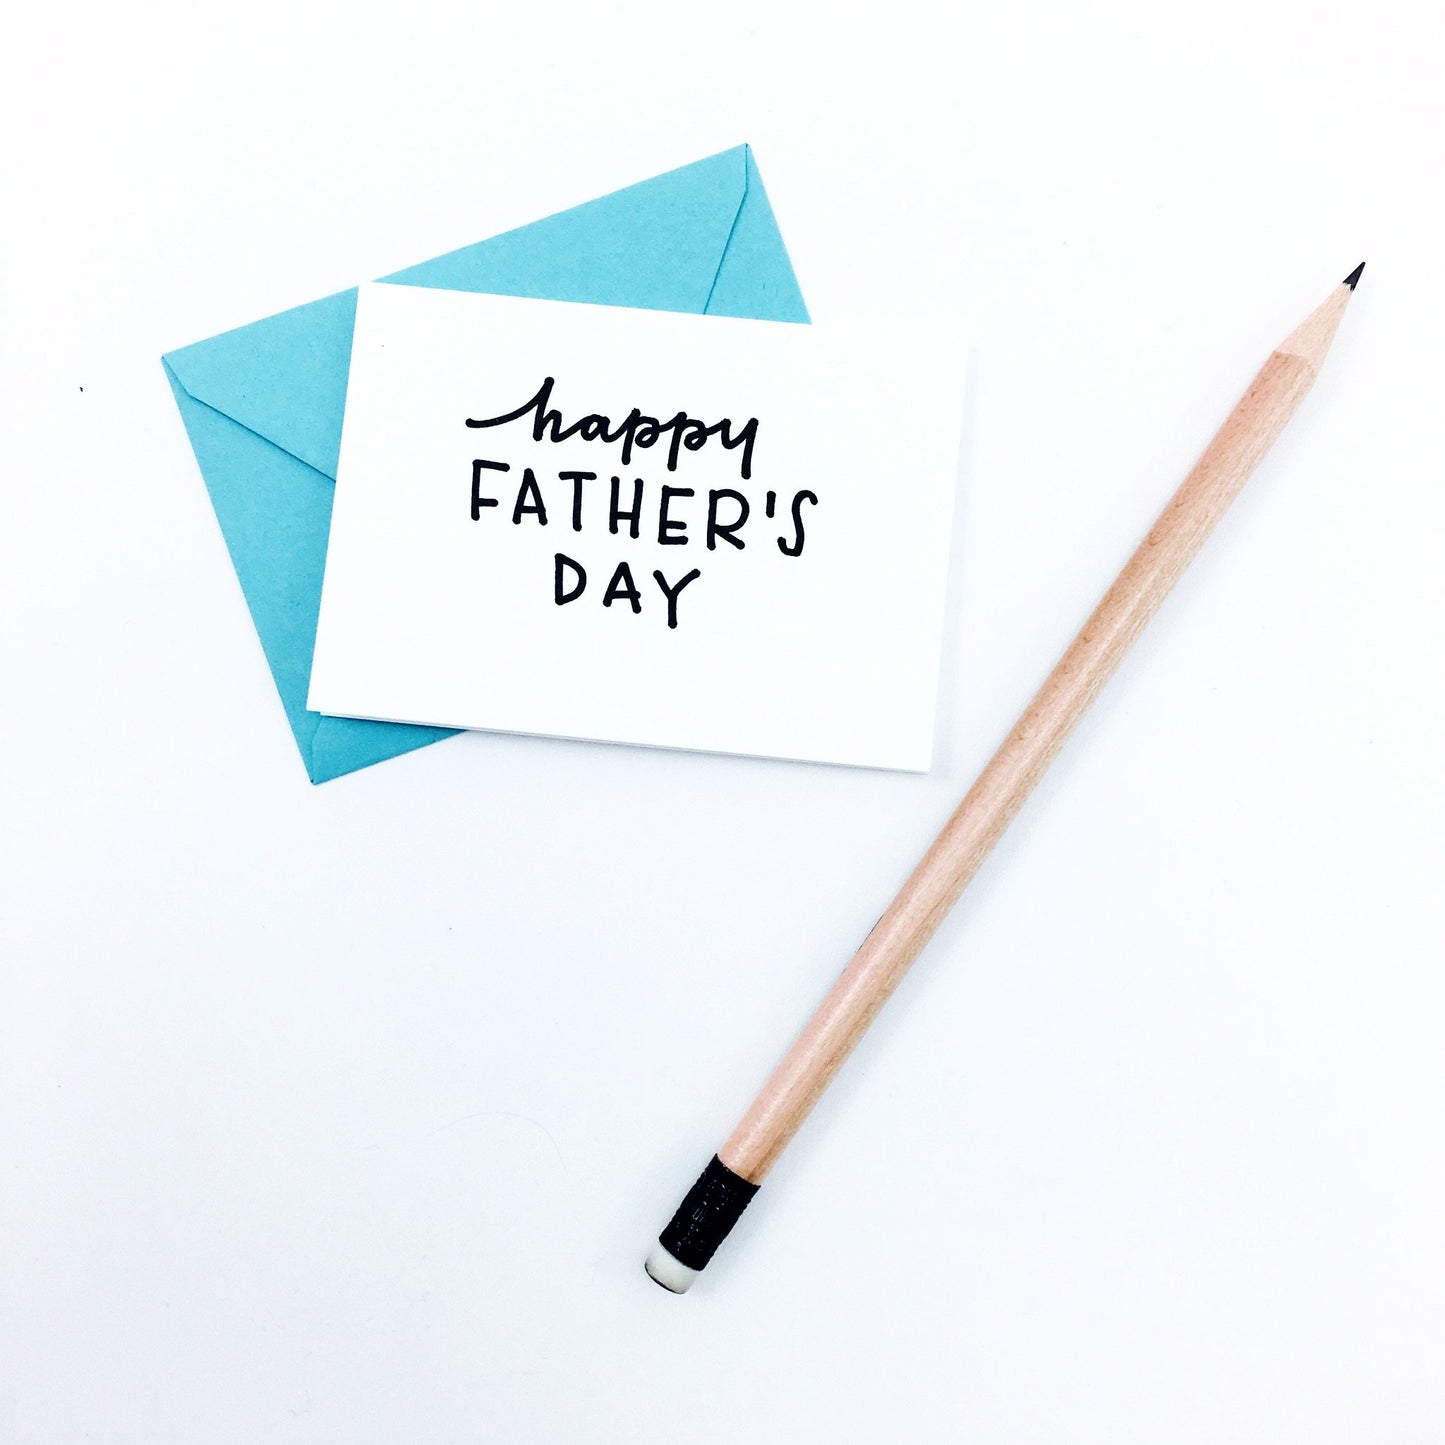 "Happy Father's Day" Mini Hand-Drawn Greeting Card - by K. A. Artist Shop - K. A. Artist Shop